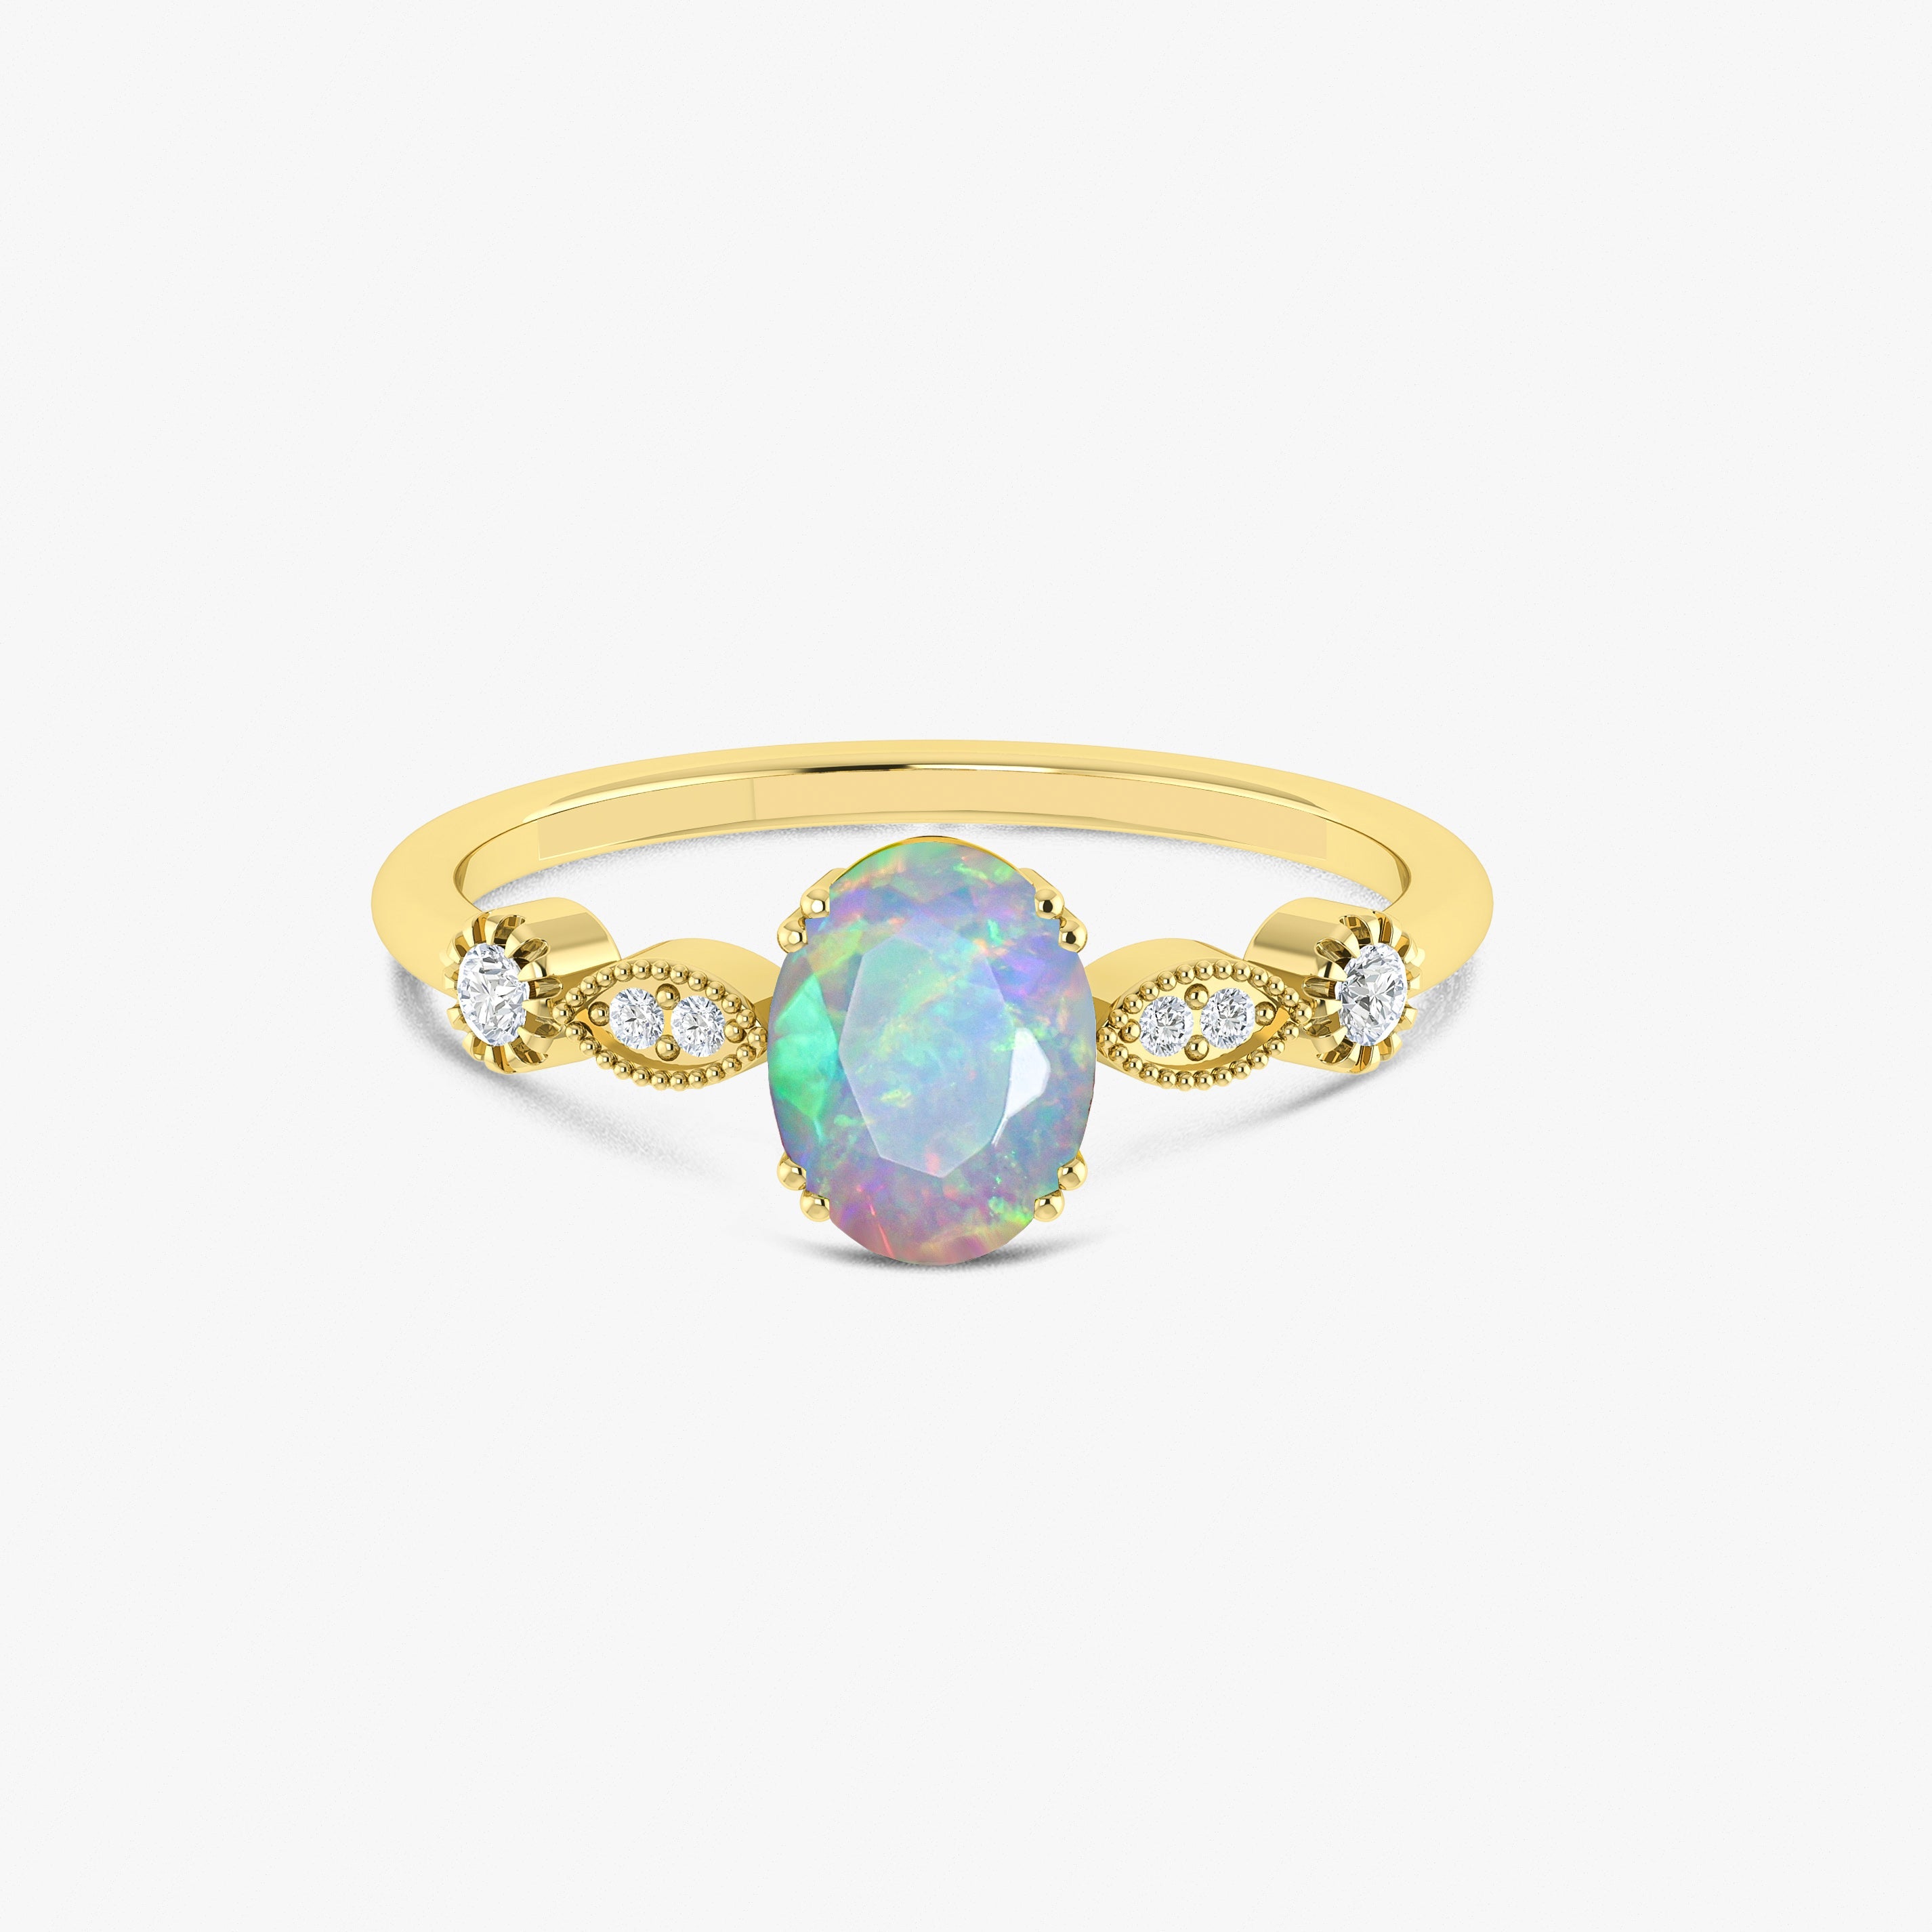 Faceted Opal Gemstone Ring